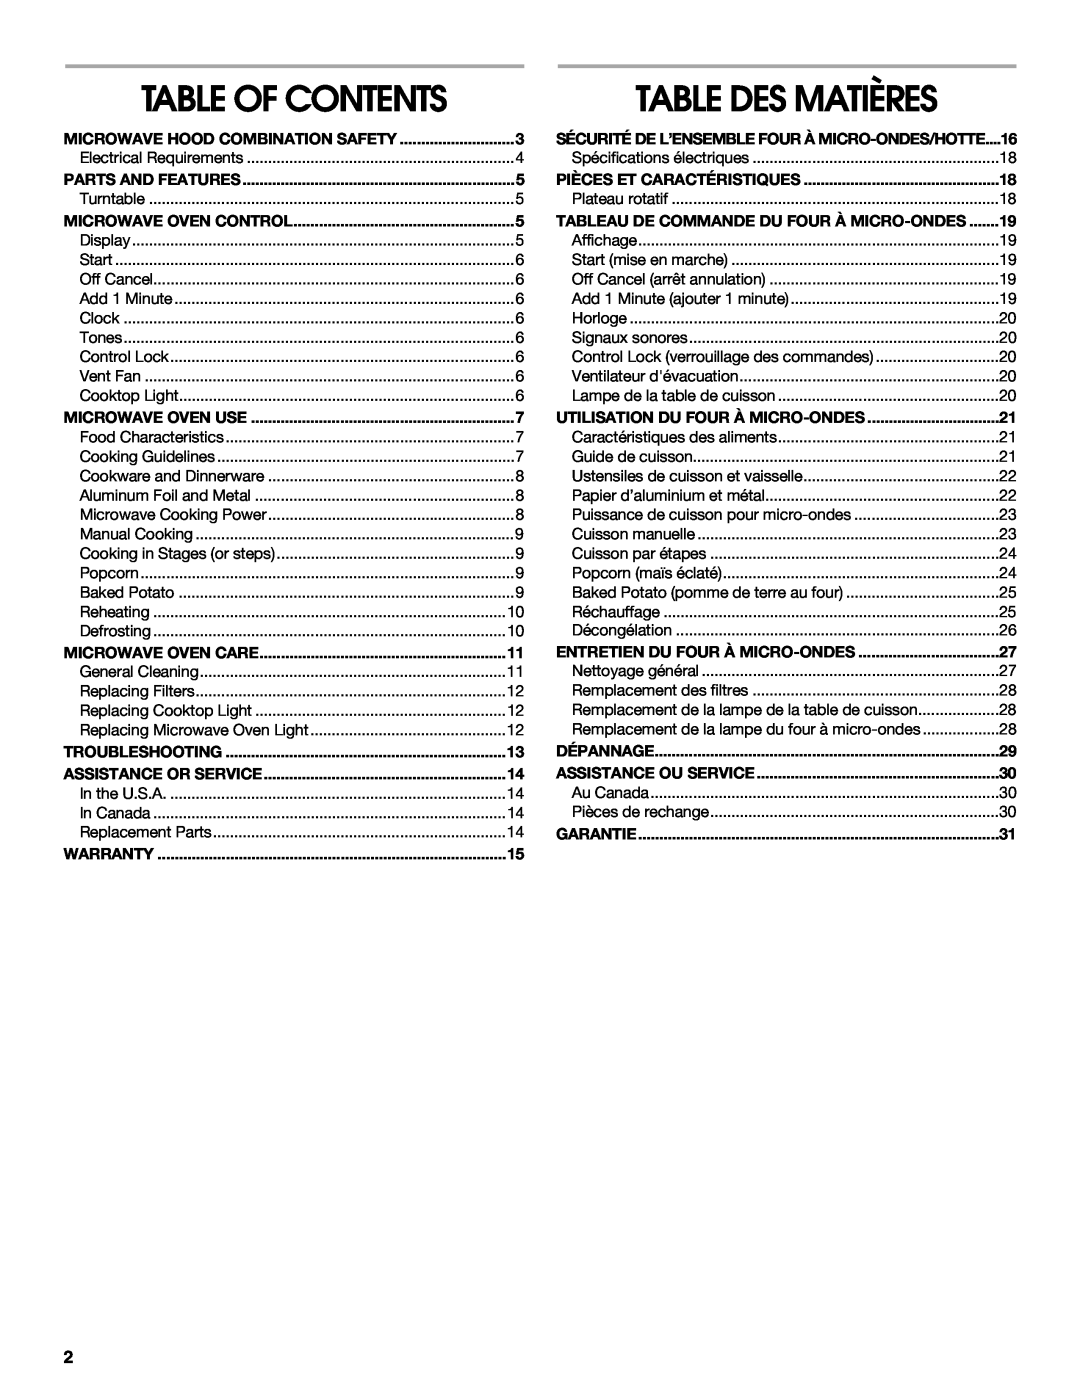 Whirlpool IMH16XS manual Table Des Matières, Table Of Contents 